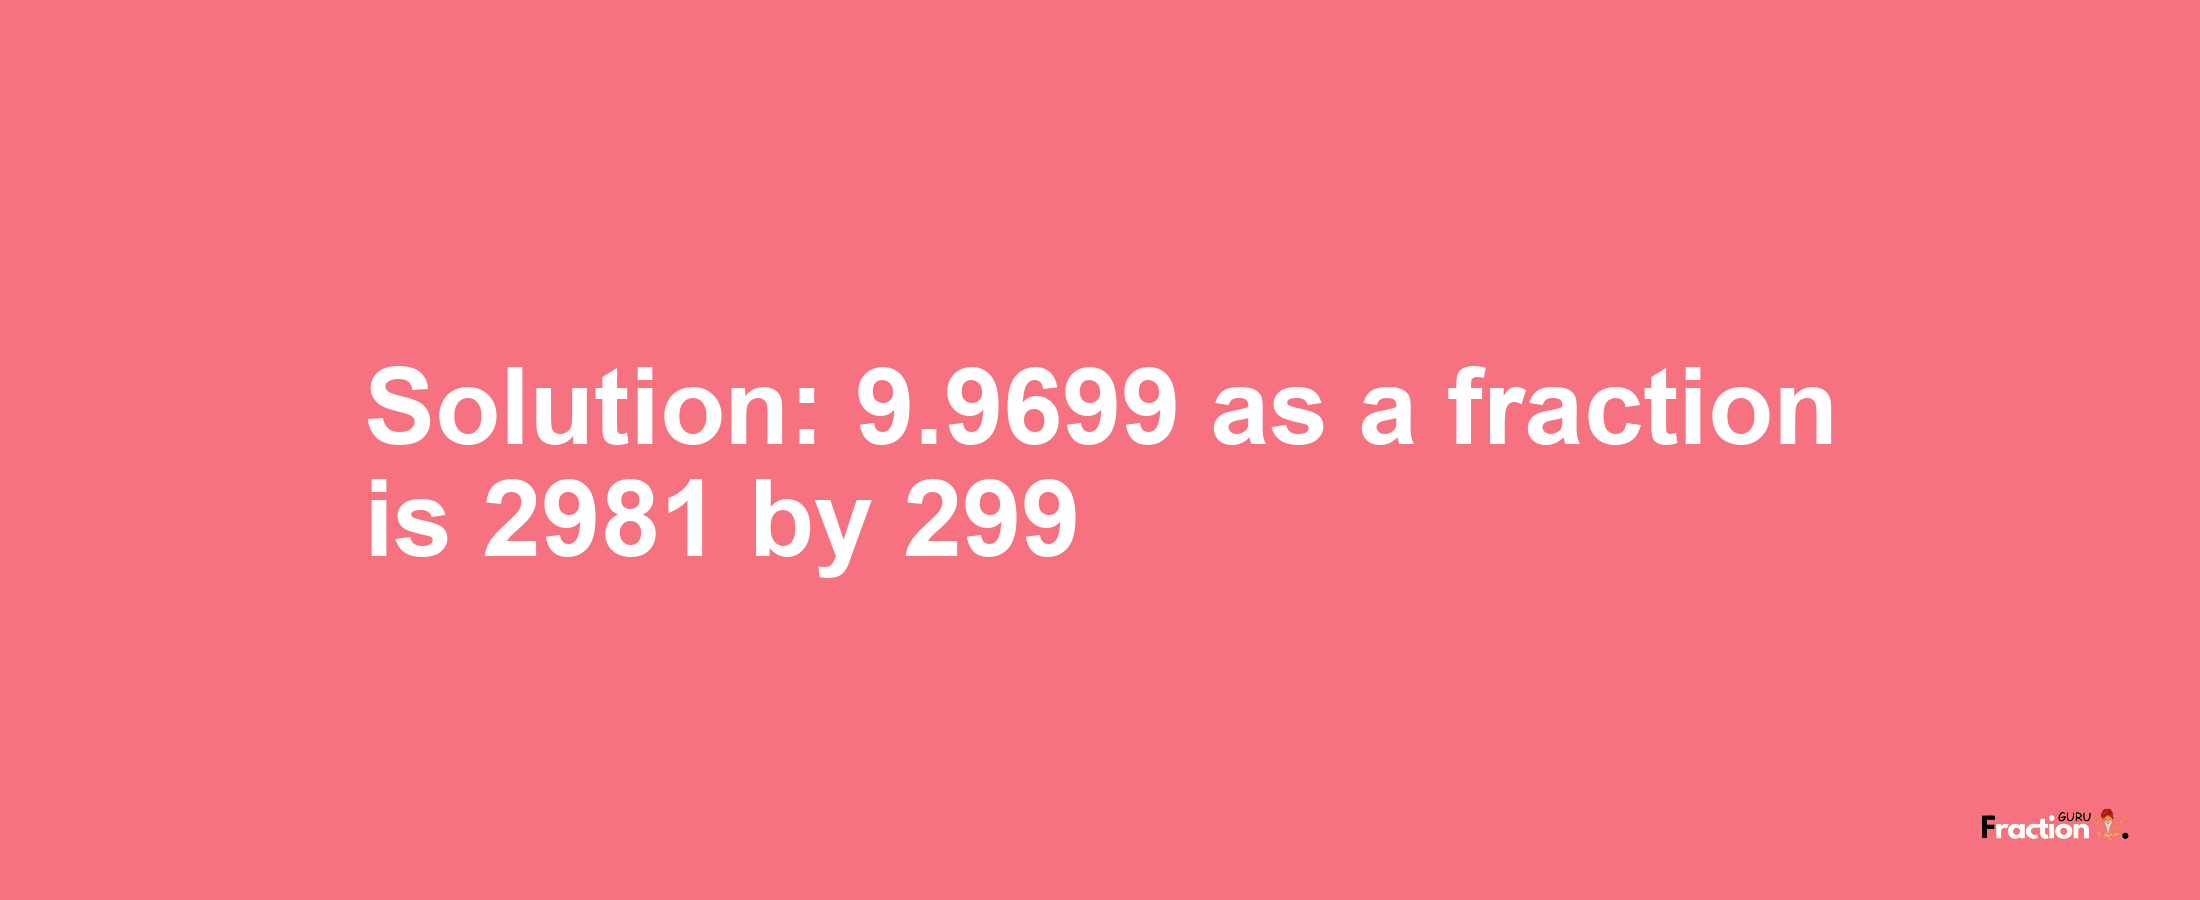 Solution:9.9699 as a fraction is 2981/299